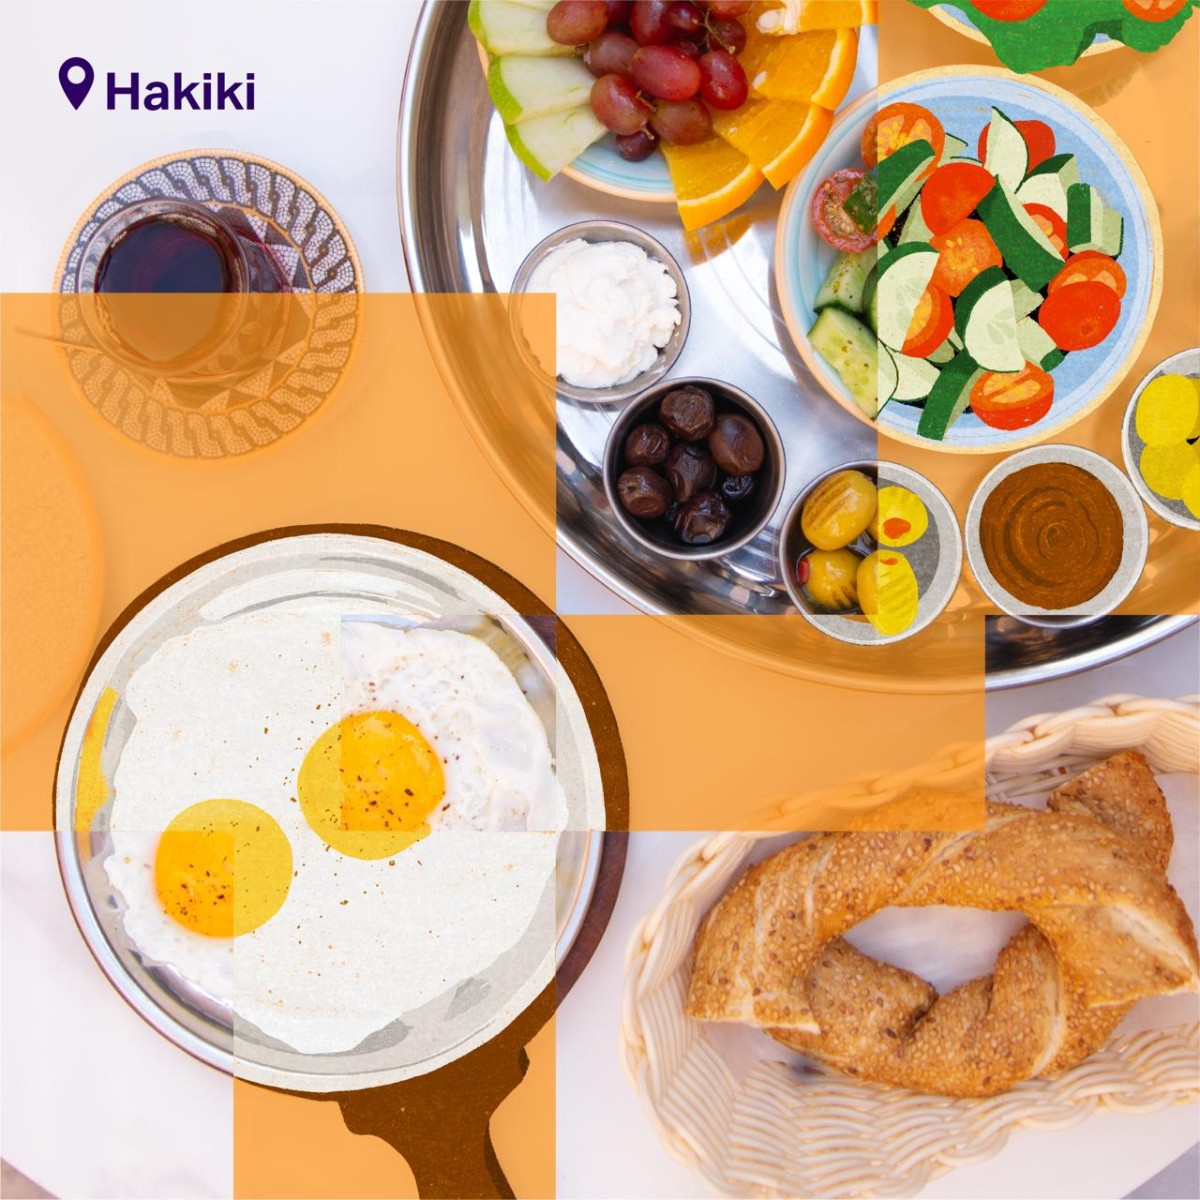 Indulge in a traditional Turkish breakfast feast at Hakiki during Dubai Food 
Festival! Experience authentic flavors served with warmth and hospitality. 

#AlSeefDubai #DubaiEats #DubaiFoodFestival #PlacesToVisit